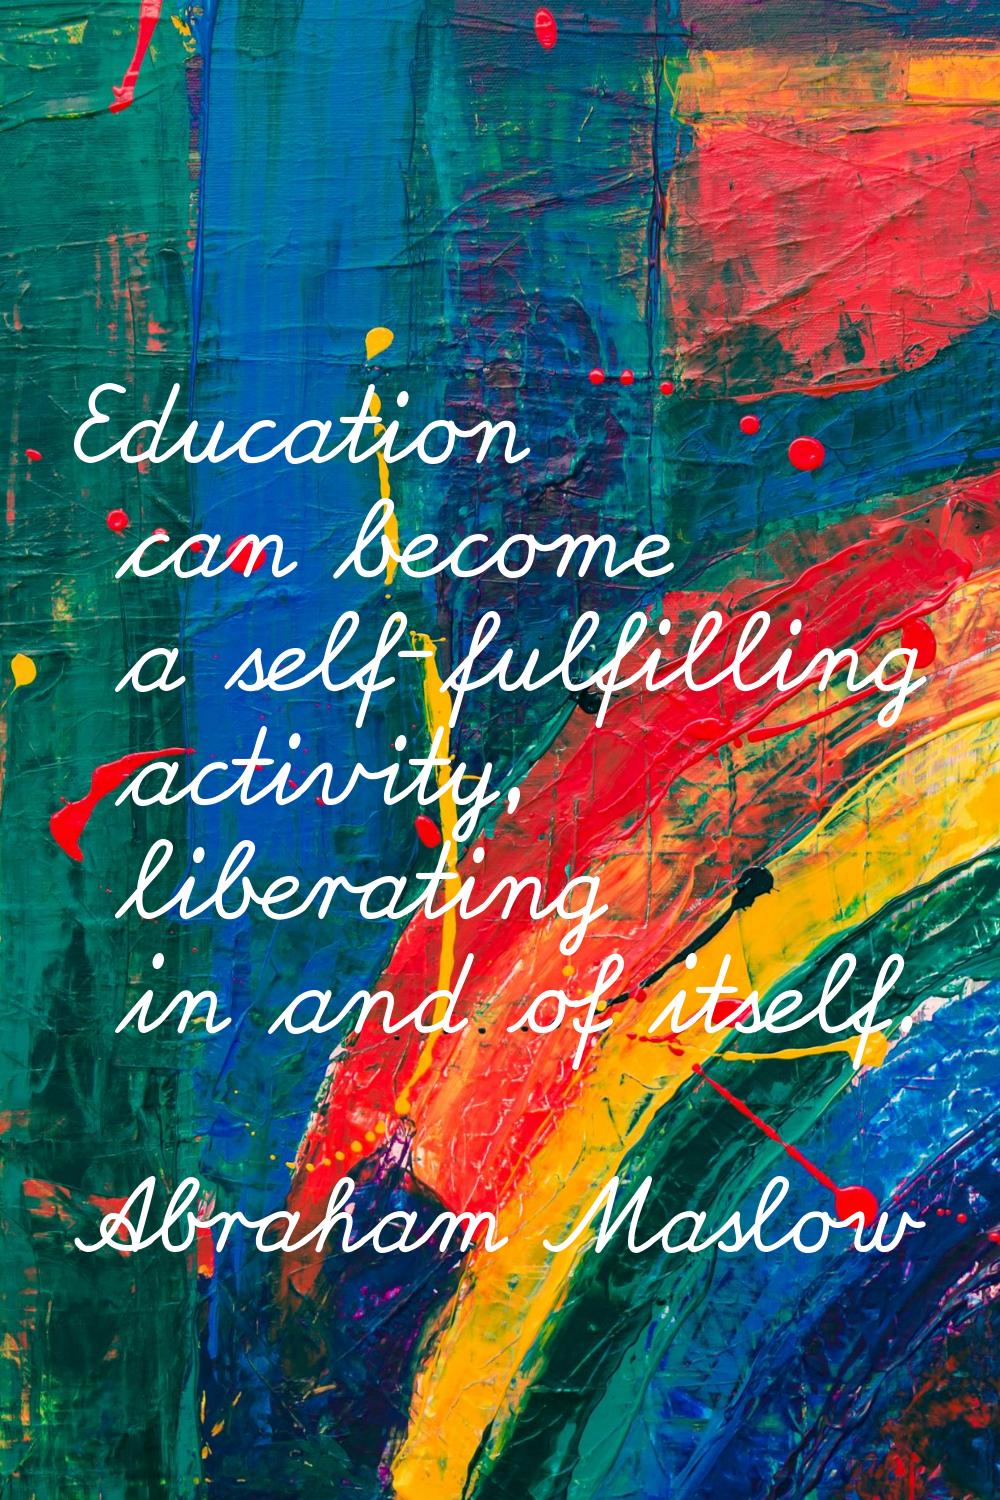 Education can become a self-fulfilling activity, liberating in and of itself.